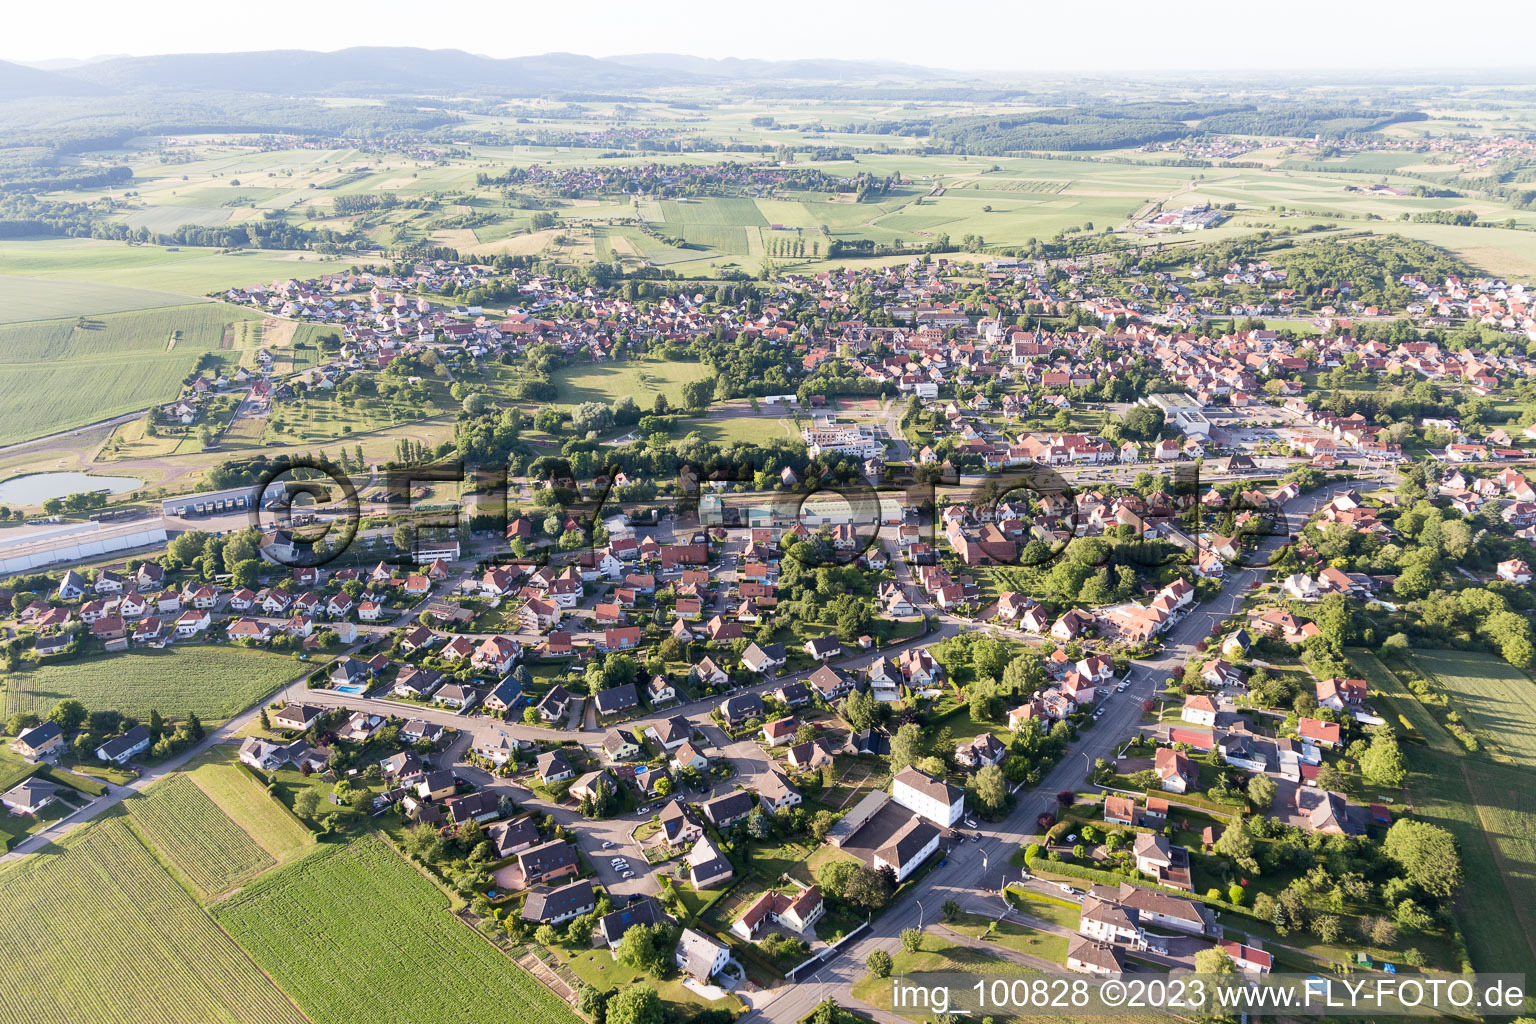 Bird's eye view of Soultz-sous-Forêts in the state Bas-Rhin, France